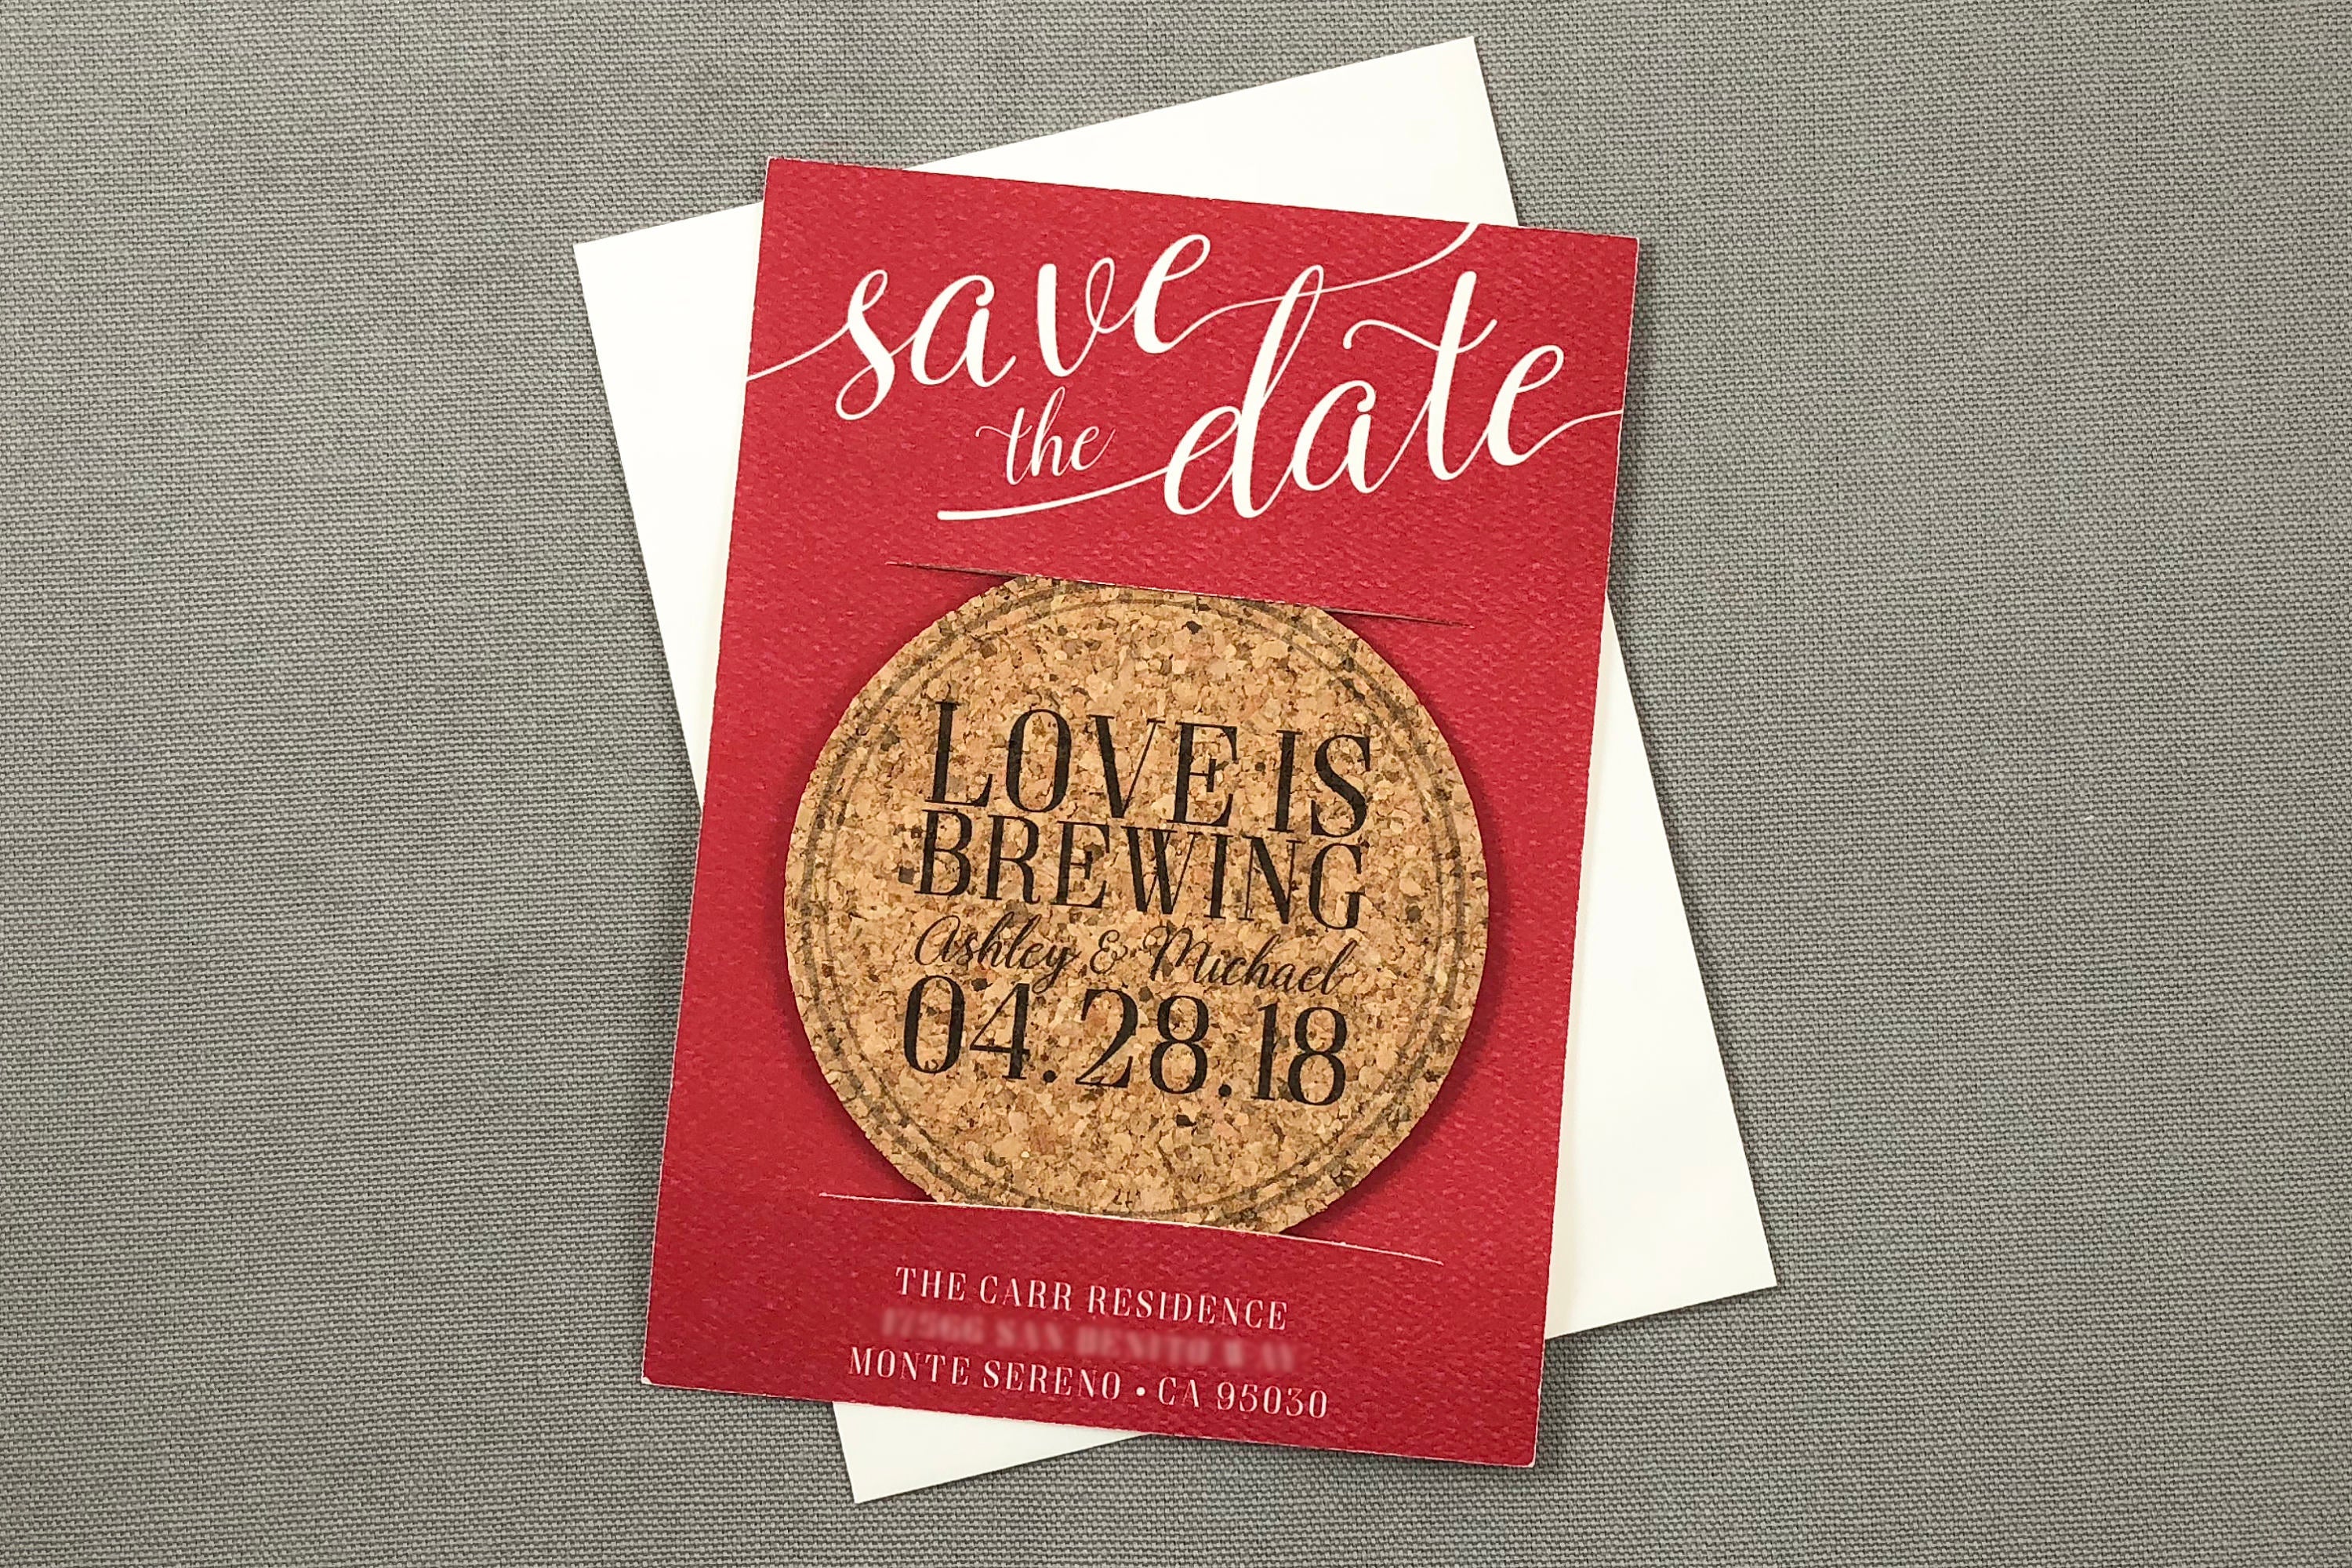 Love is Brewing Save the Date Cork Coaster Red and Black // Coaster Wedding Save the Date